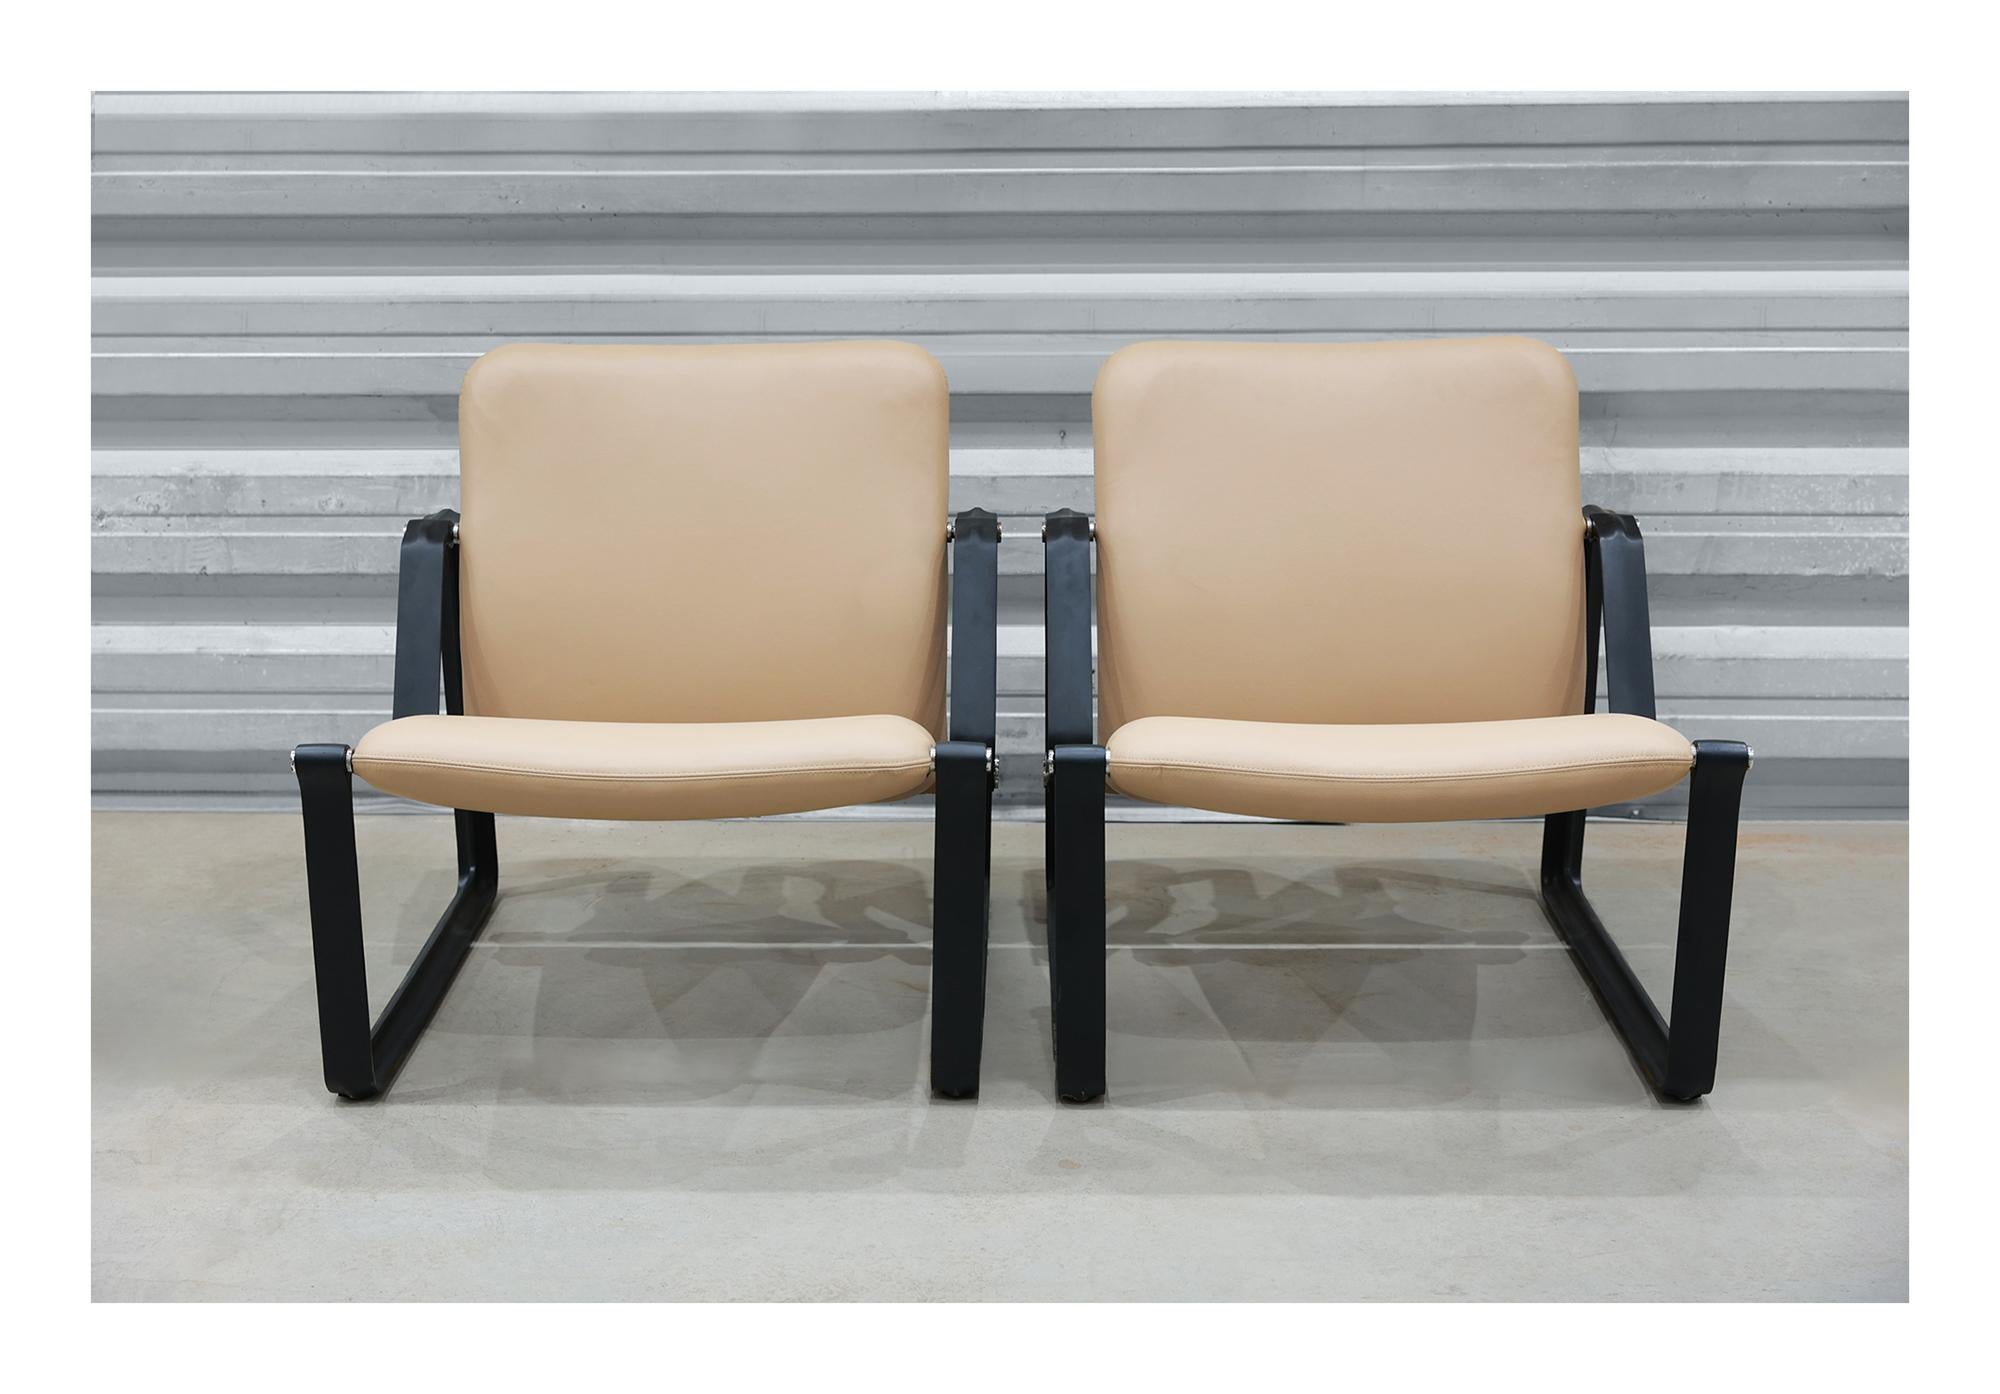 Brazilian Modern “Lobby” armchairs by Jorge Zalszupin in metal and leather, 1970 For Sale 1